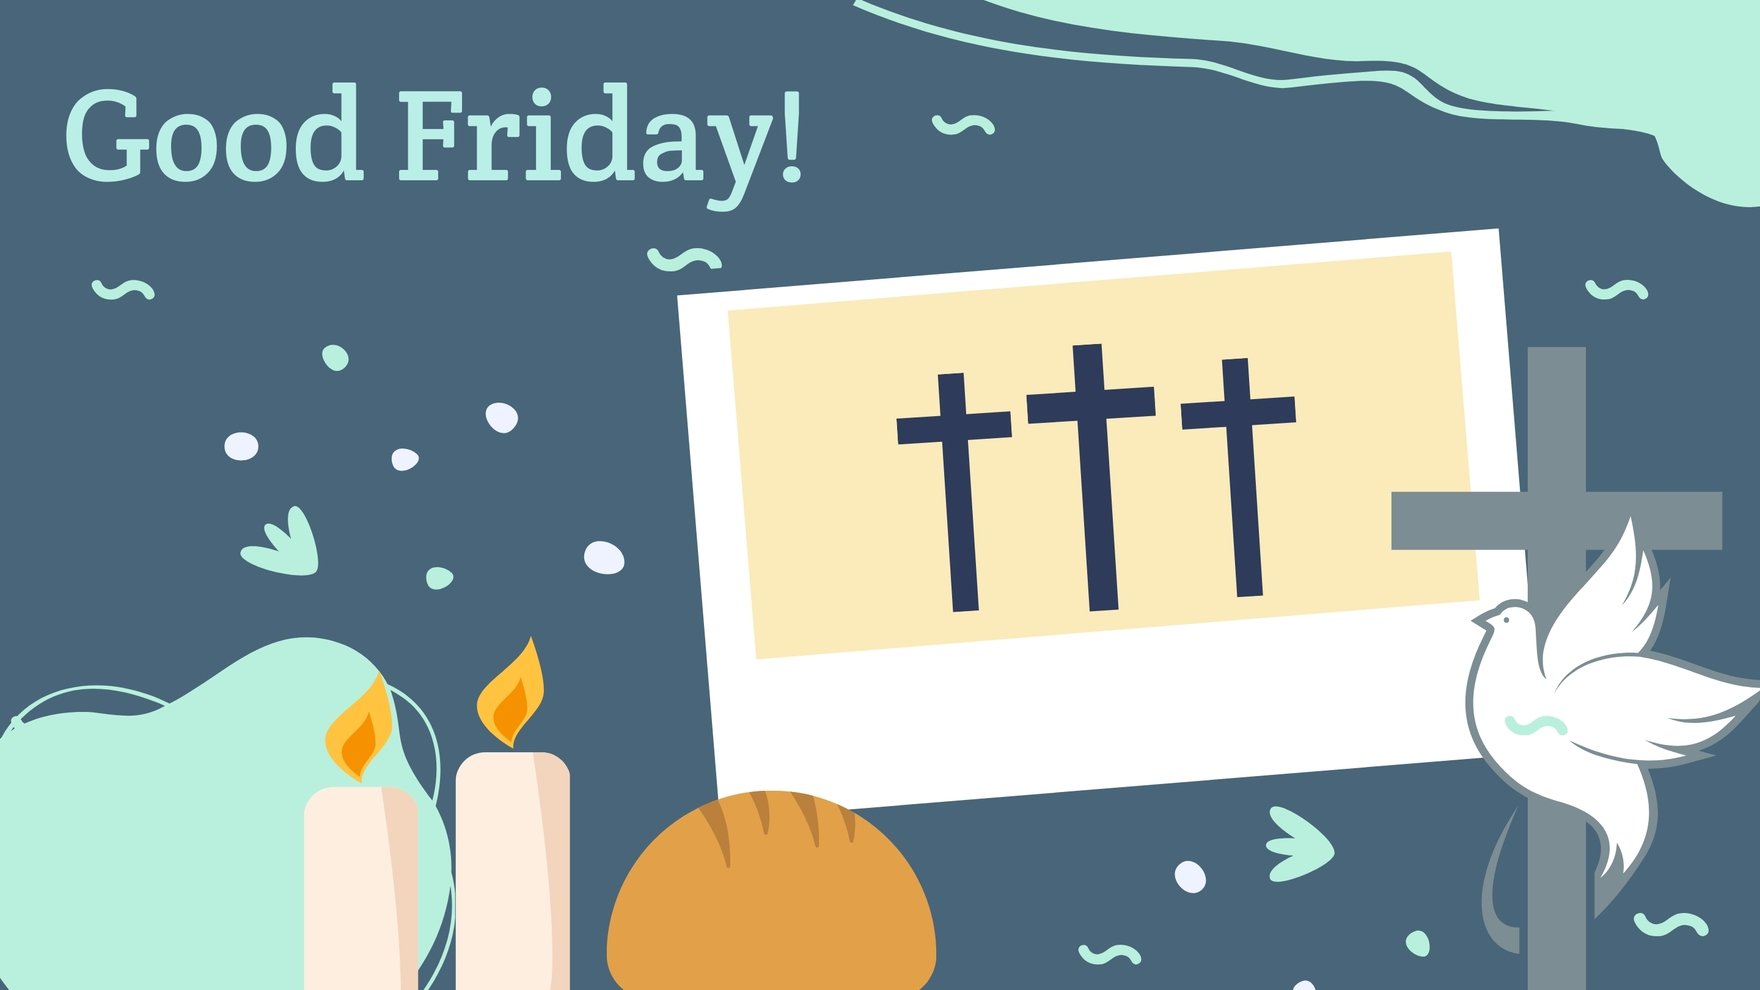 Good Friday Picture Background